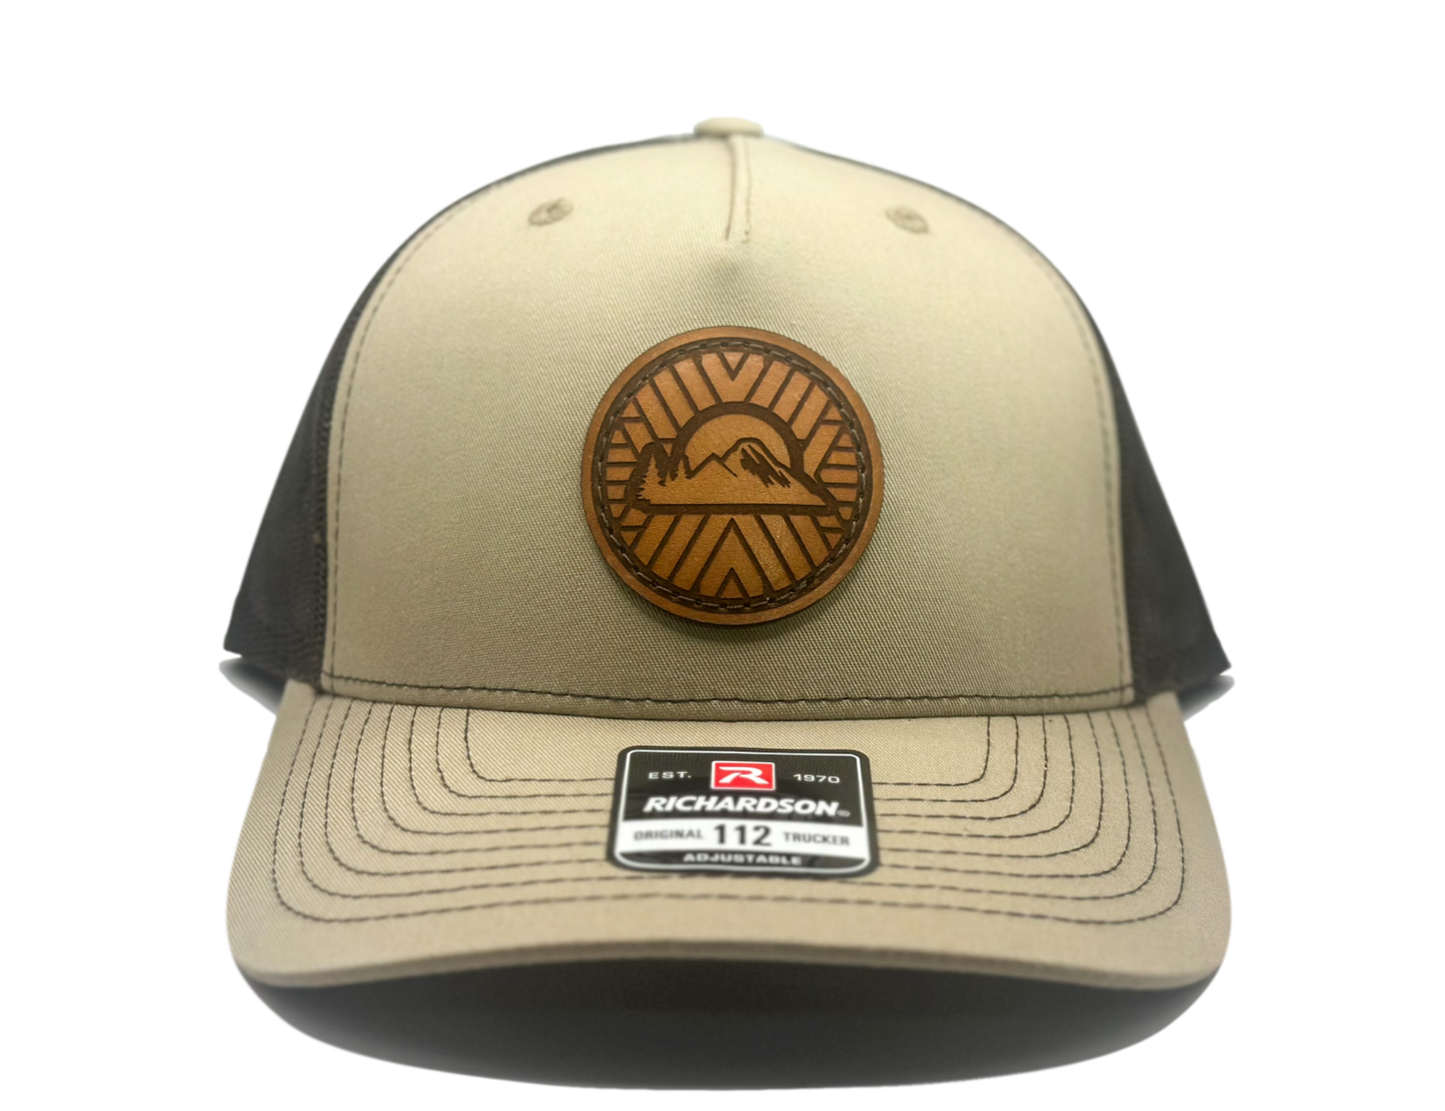 Custom Khaki/Coffee Richardson Leather Patch hat. Our custom designed leather patch is laser engraved and sewn onto a Richardson 112 Hat. We use full-grain, veg tanned leather. Our custom leather patches are handmade and designed in Colorado, USA